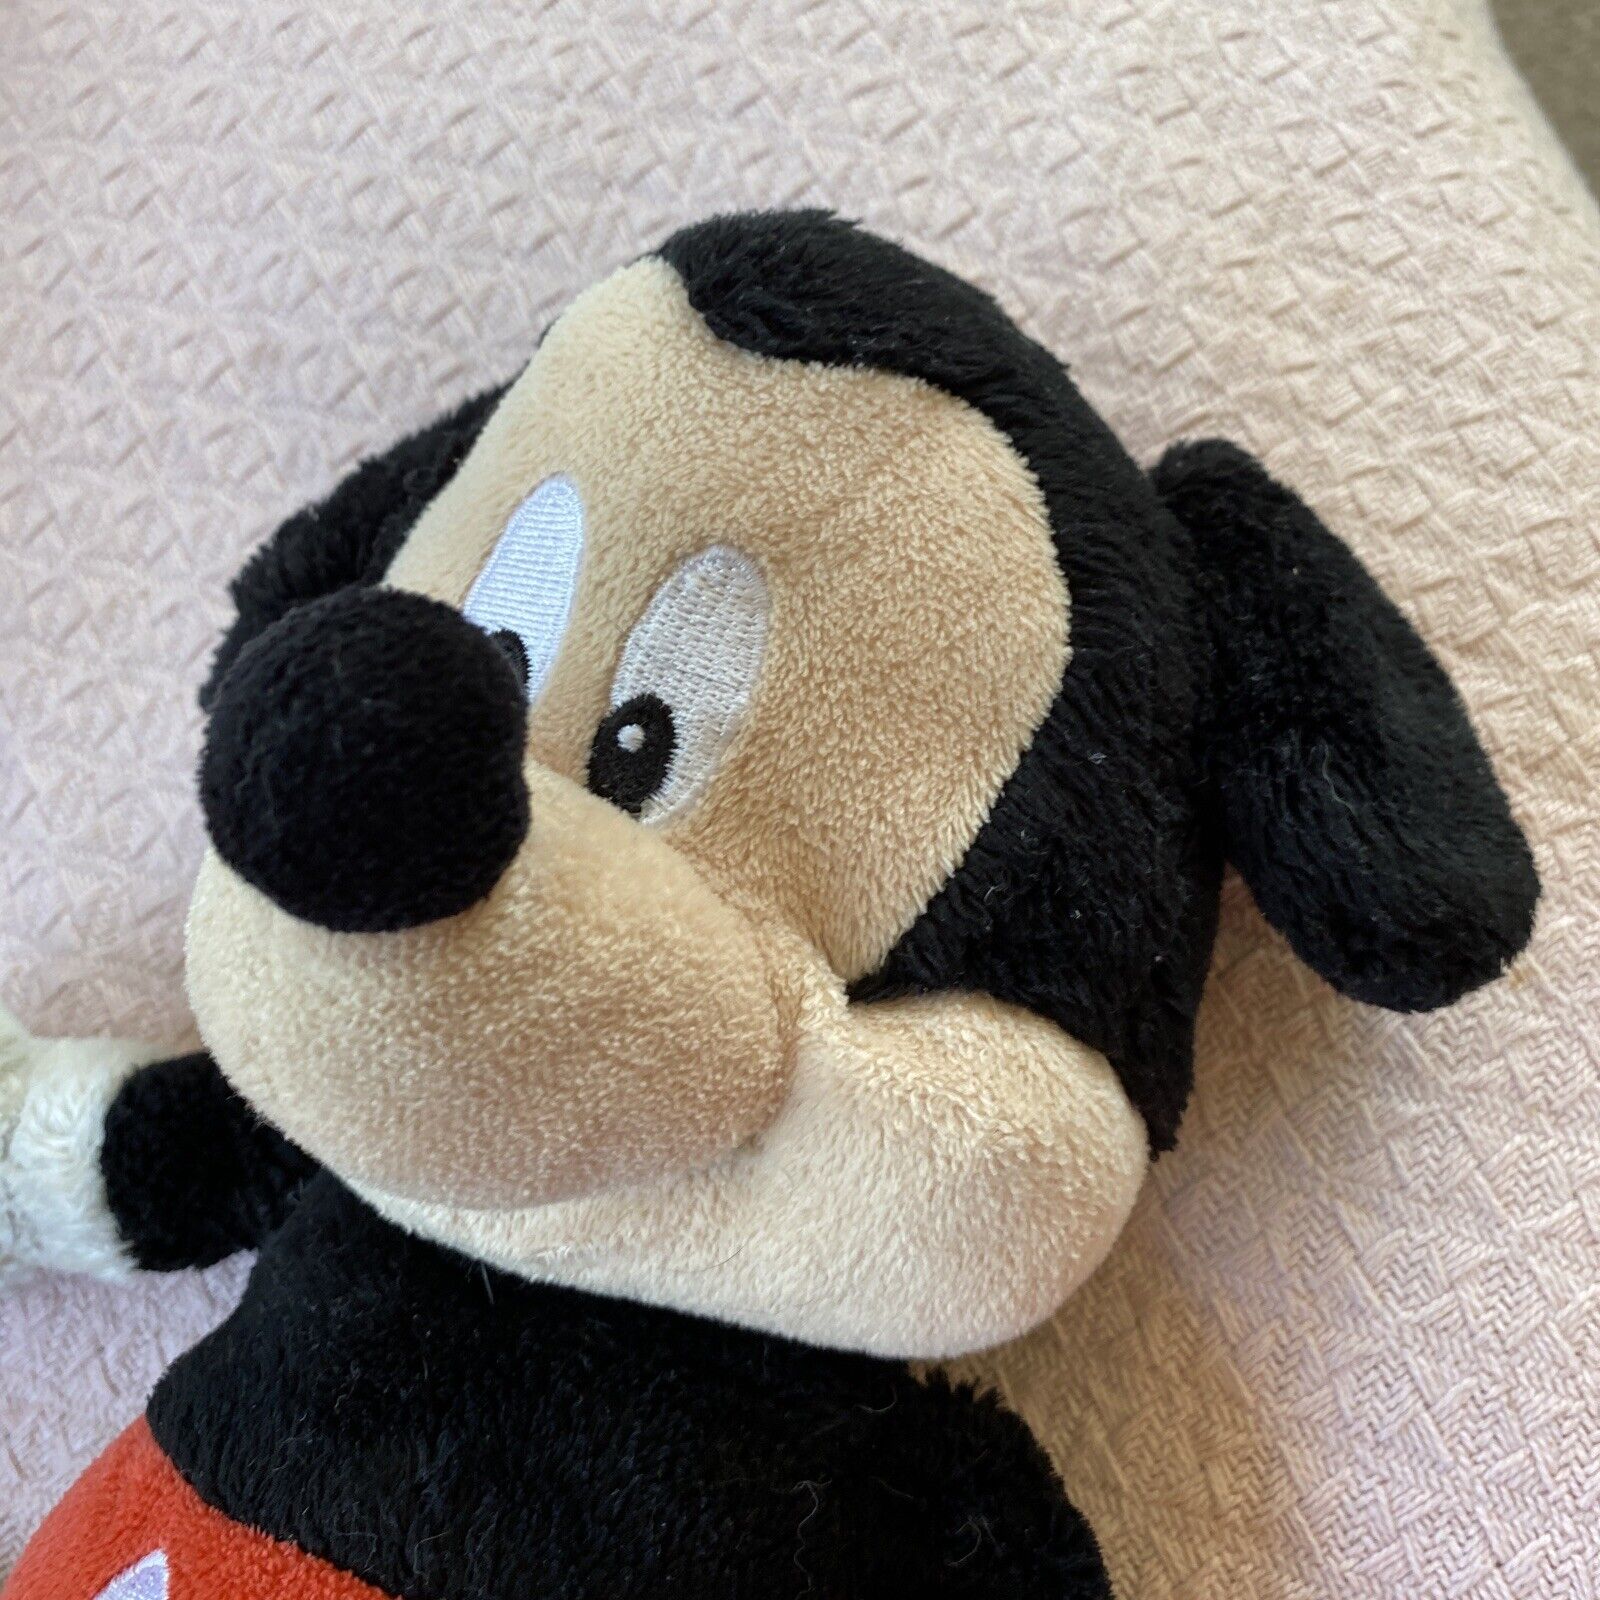 Vtg Old Disney Mickey Mouse Plush with a baby rattle inside Heavily Used